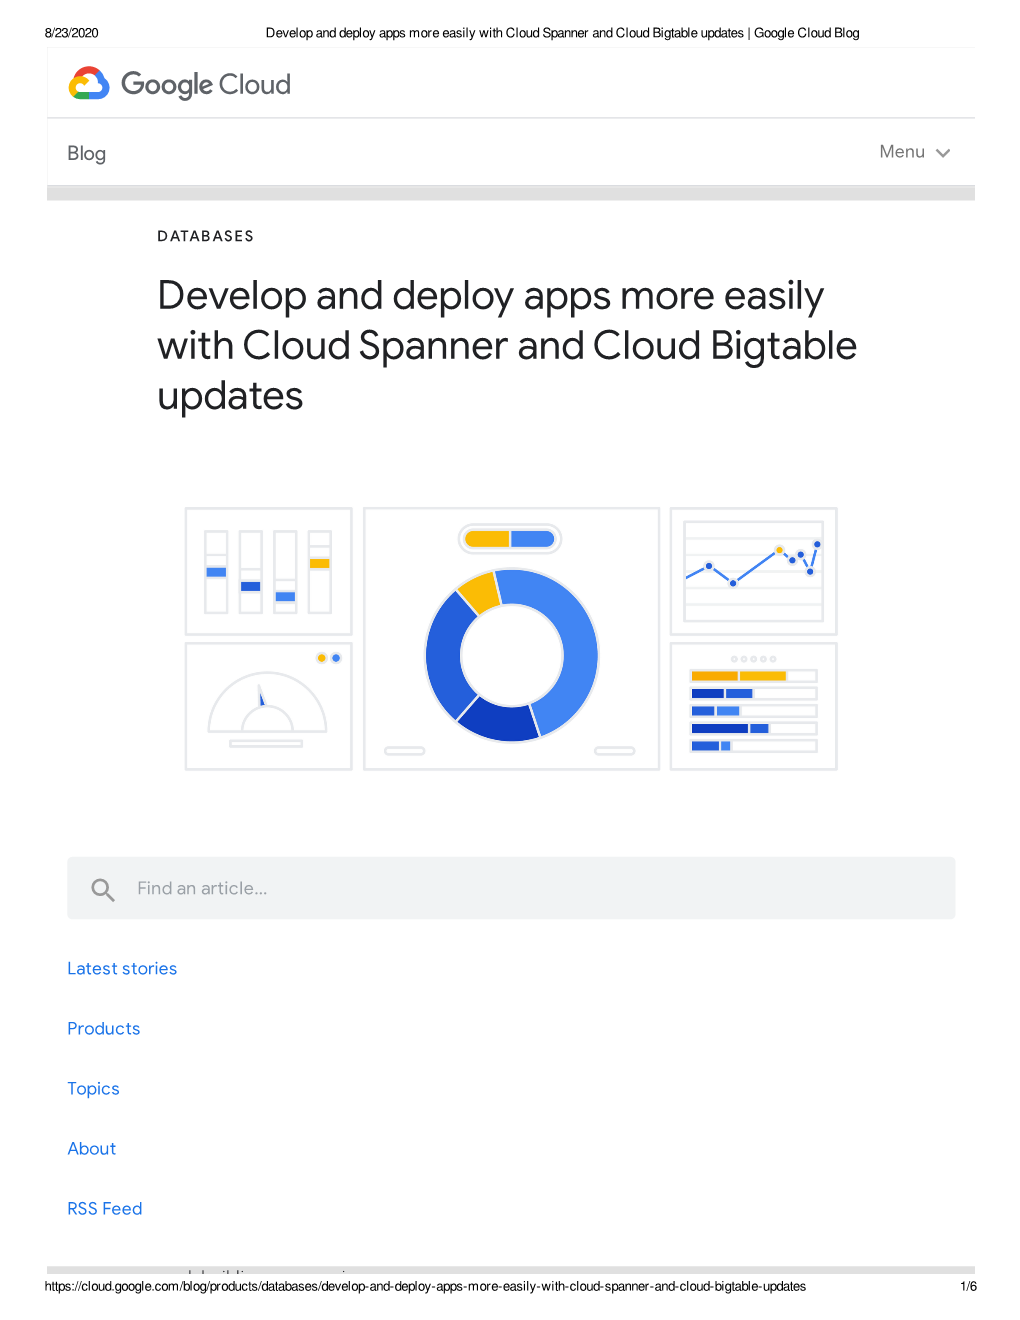 Develop and Deploy Apps More Easily with Cloud Spanner and Cloud Bigtable Updates | Google Cloud Blog